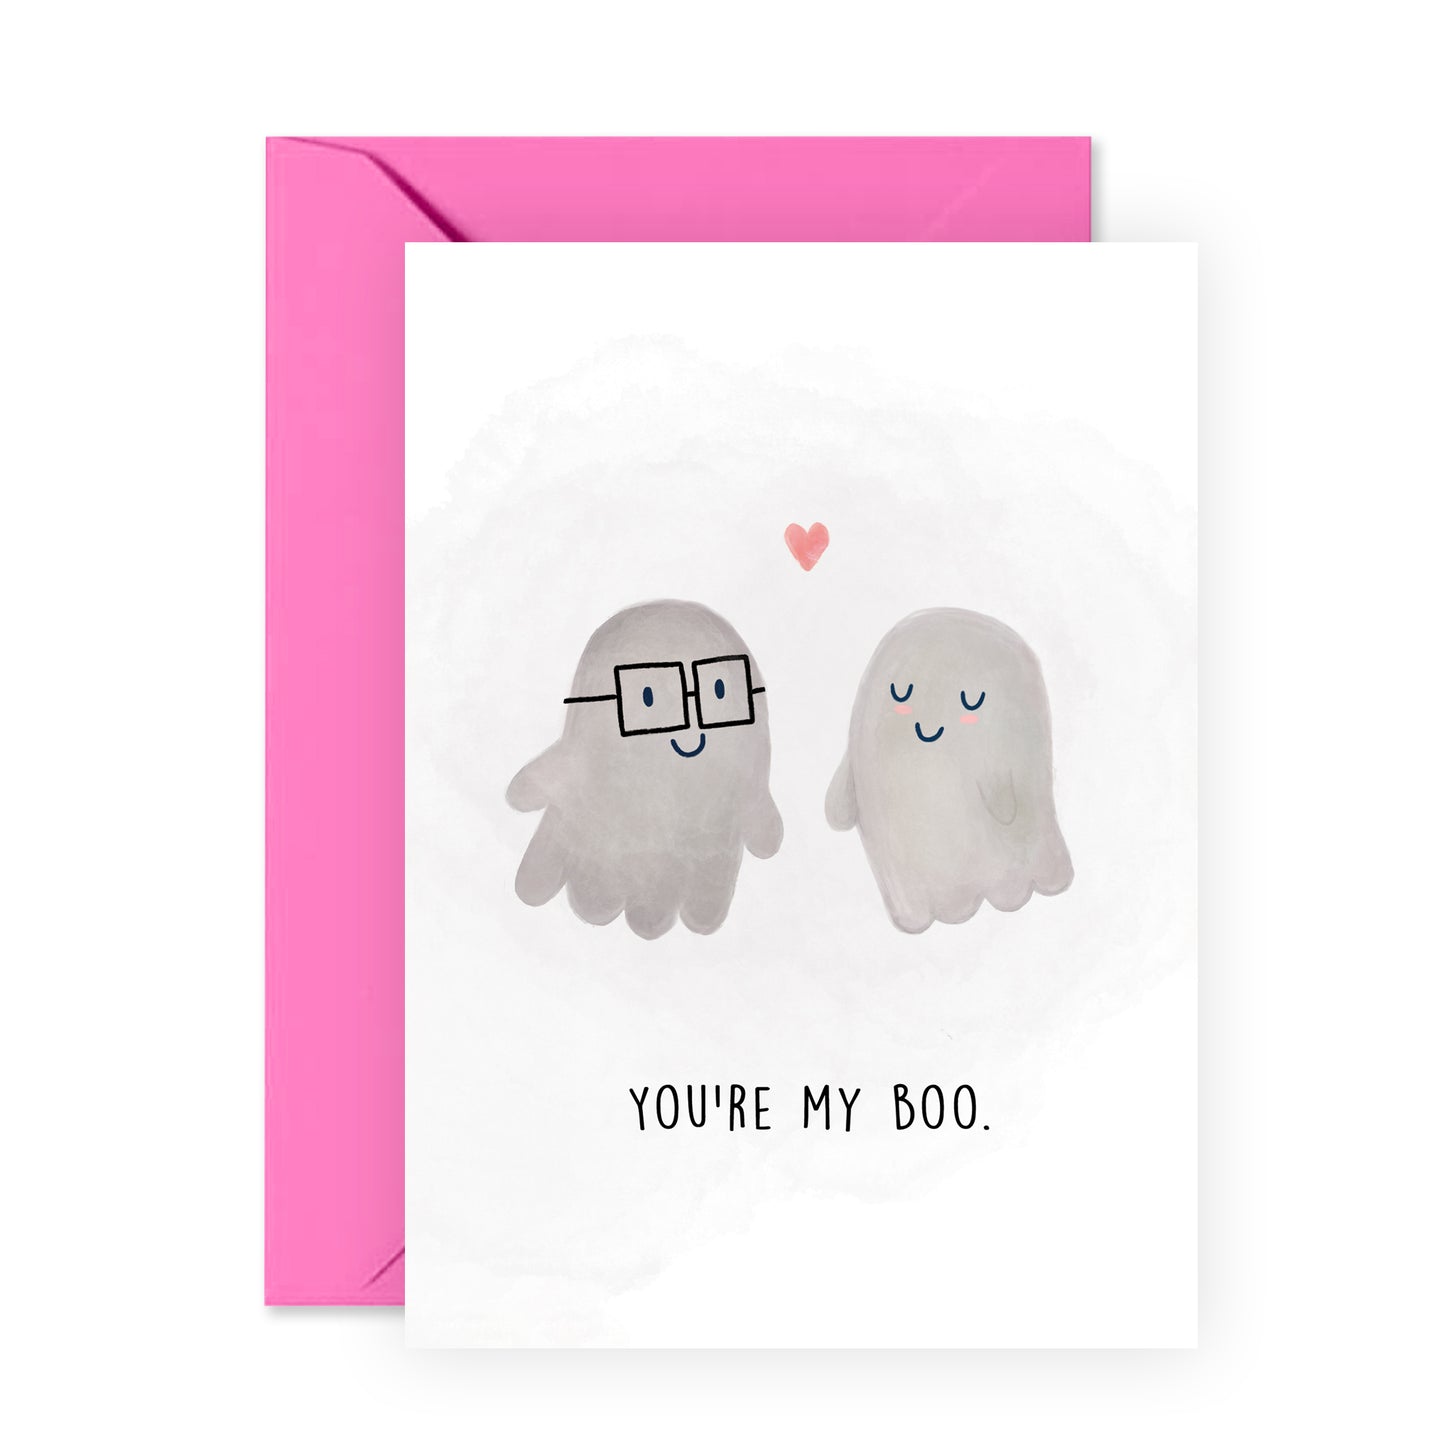 Cute Anniversary Card - You're My Boo - For Men Women Him Her